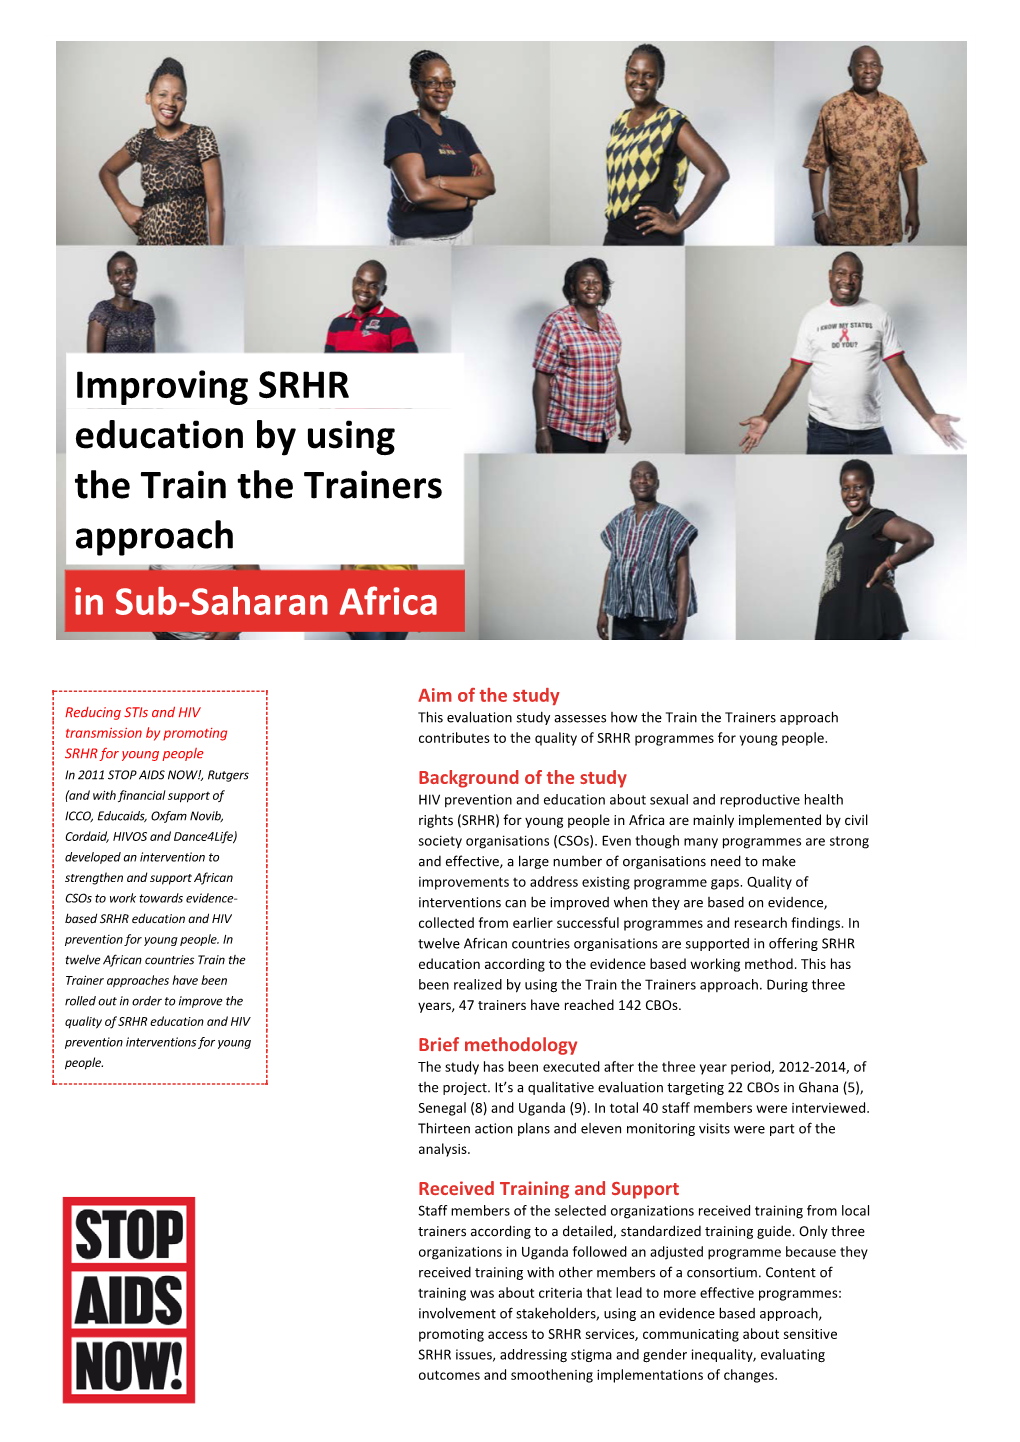 Improving SRHR Education by Using the Train the Trainers Approach.Pdf